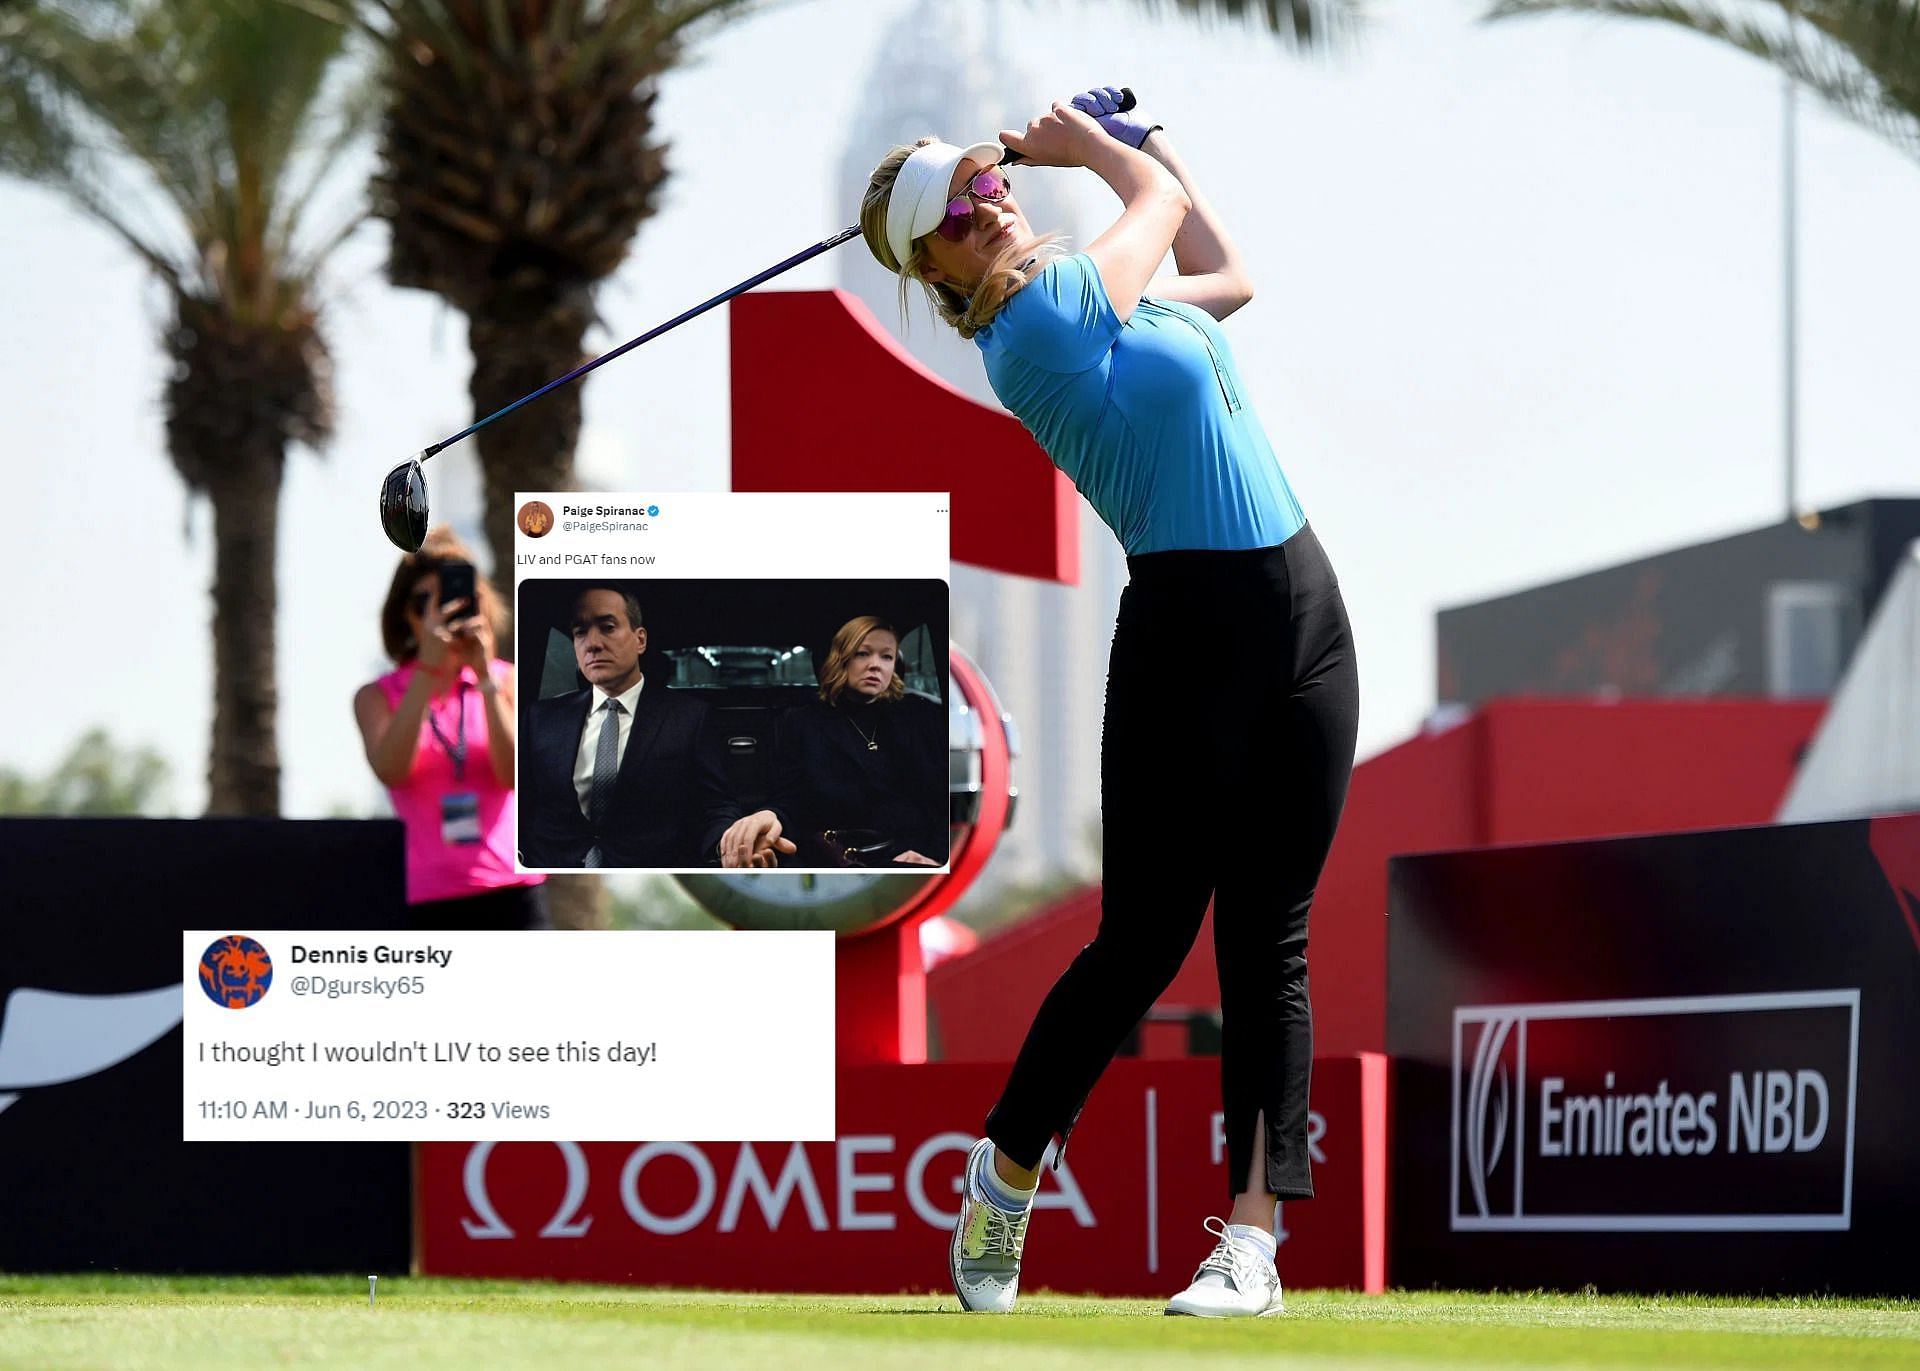 Paige Spiranac reacted to the merger and fans reacted to her post (Imag via Getty and Twitter).